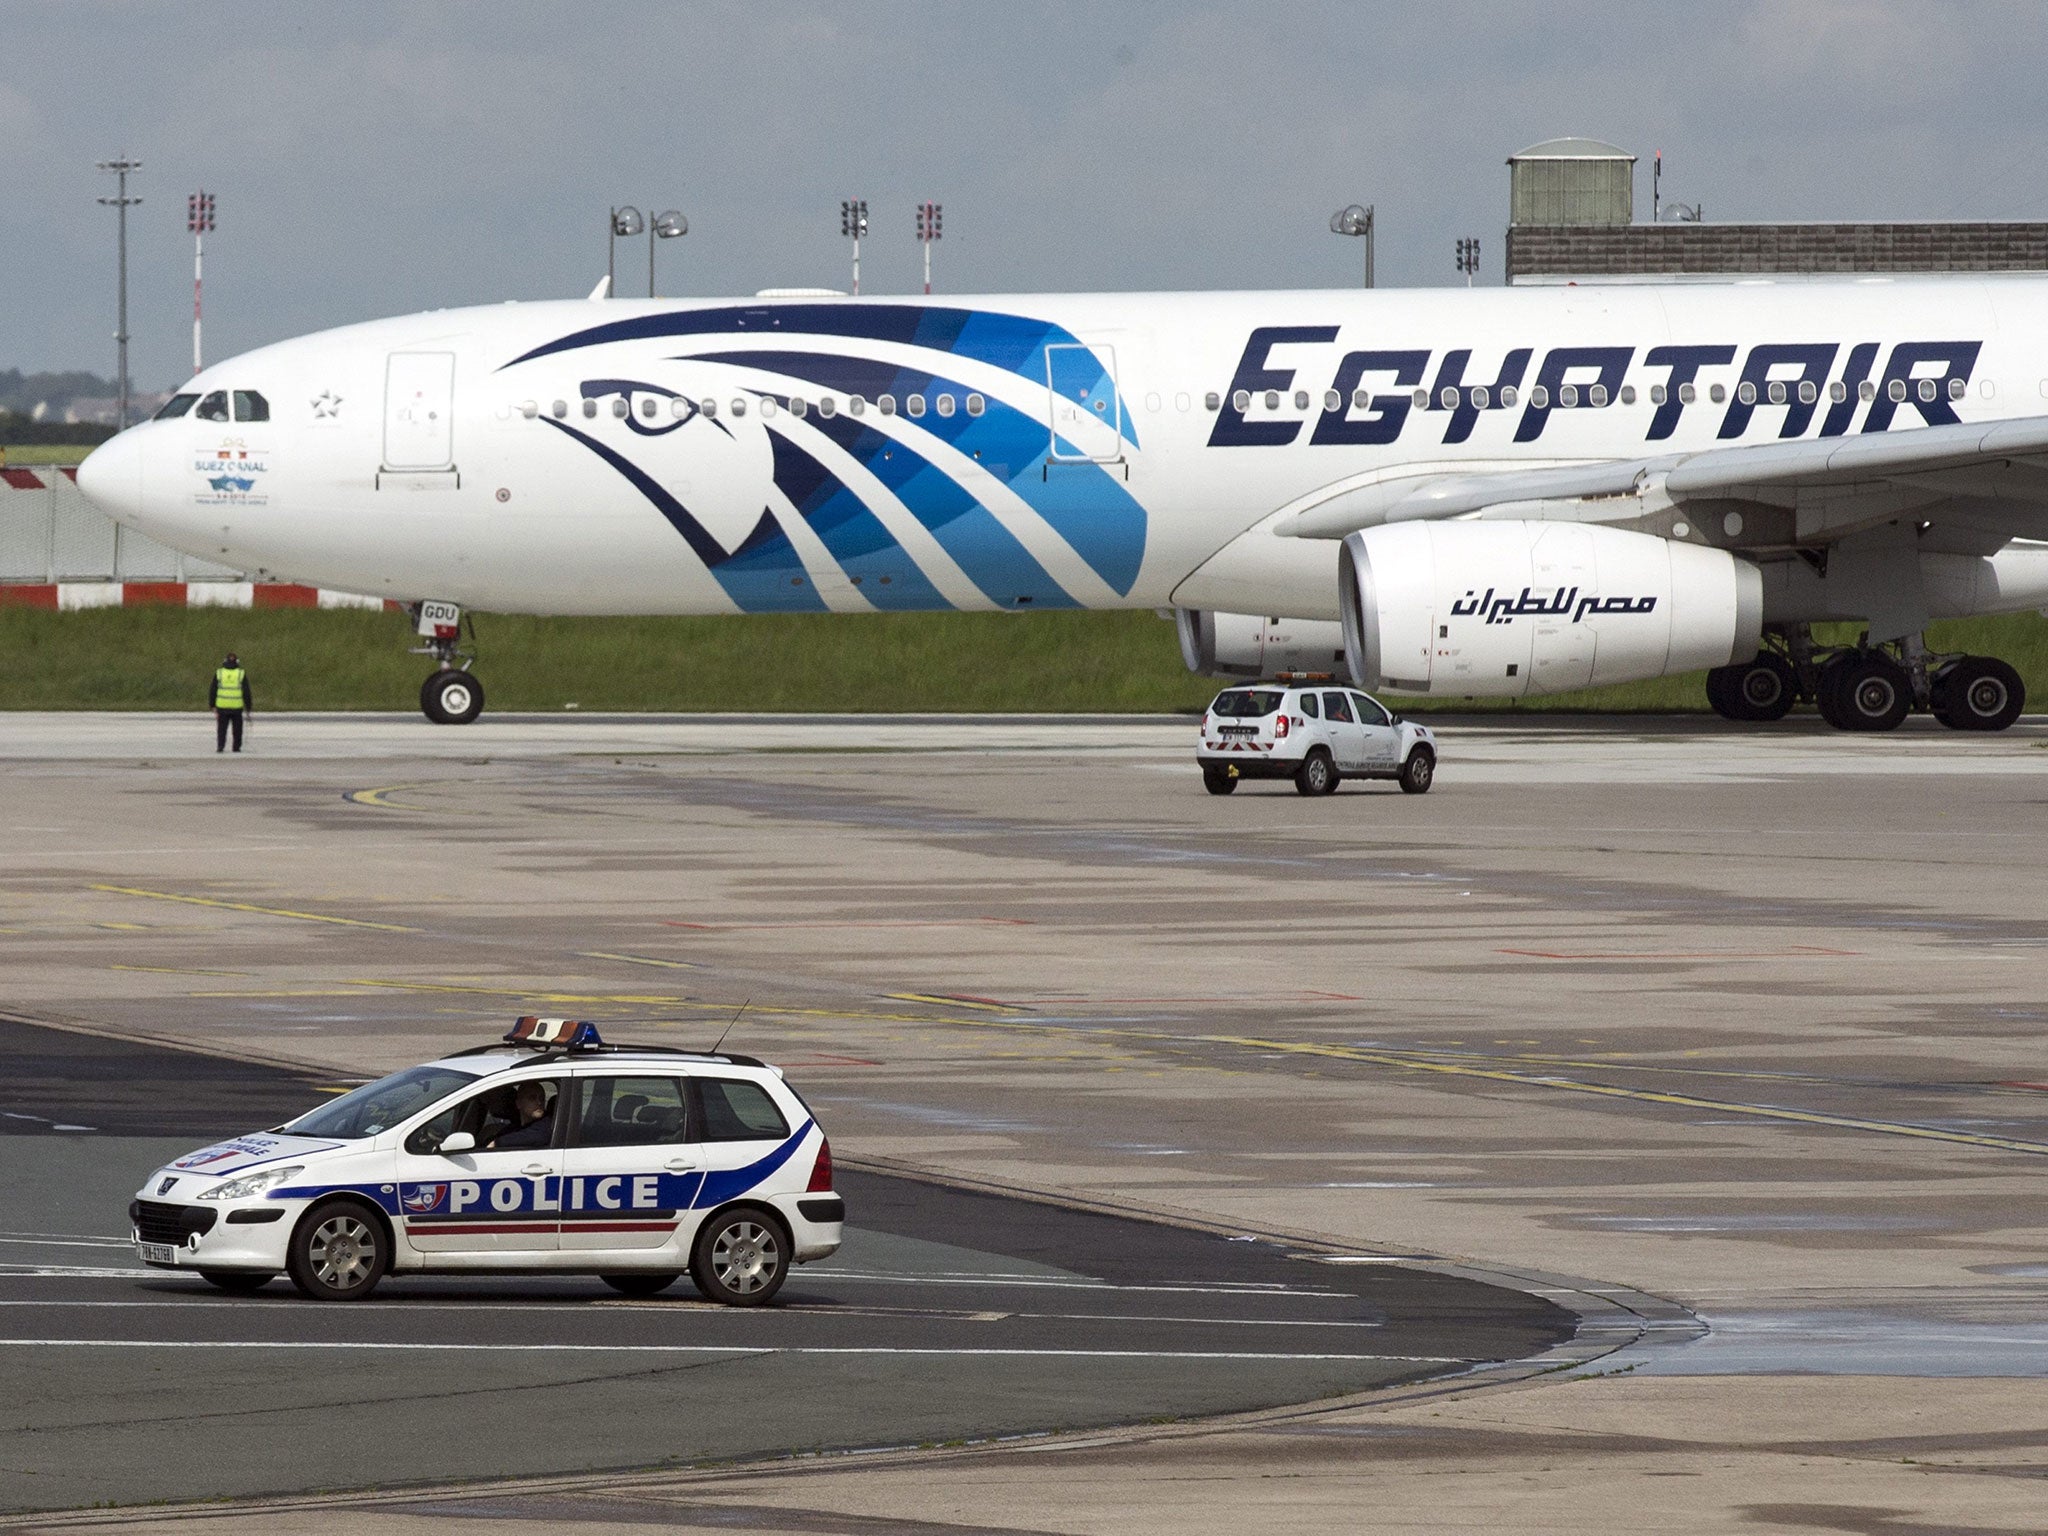 A French police car passes by an Egyptair plane taking off from the Charles de Gaule airport near Paris, France, 19 May 2016